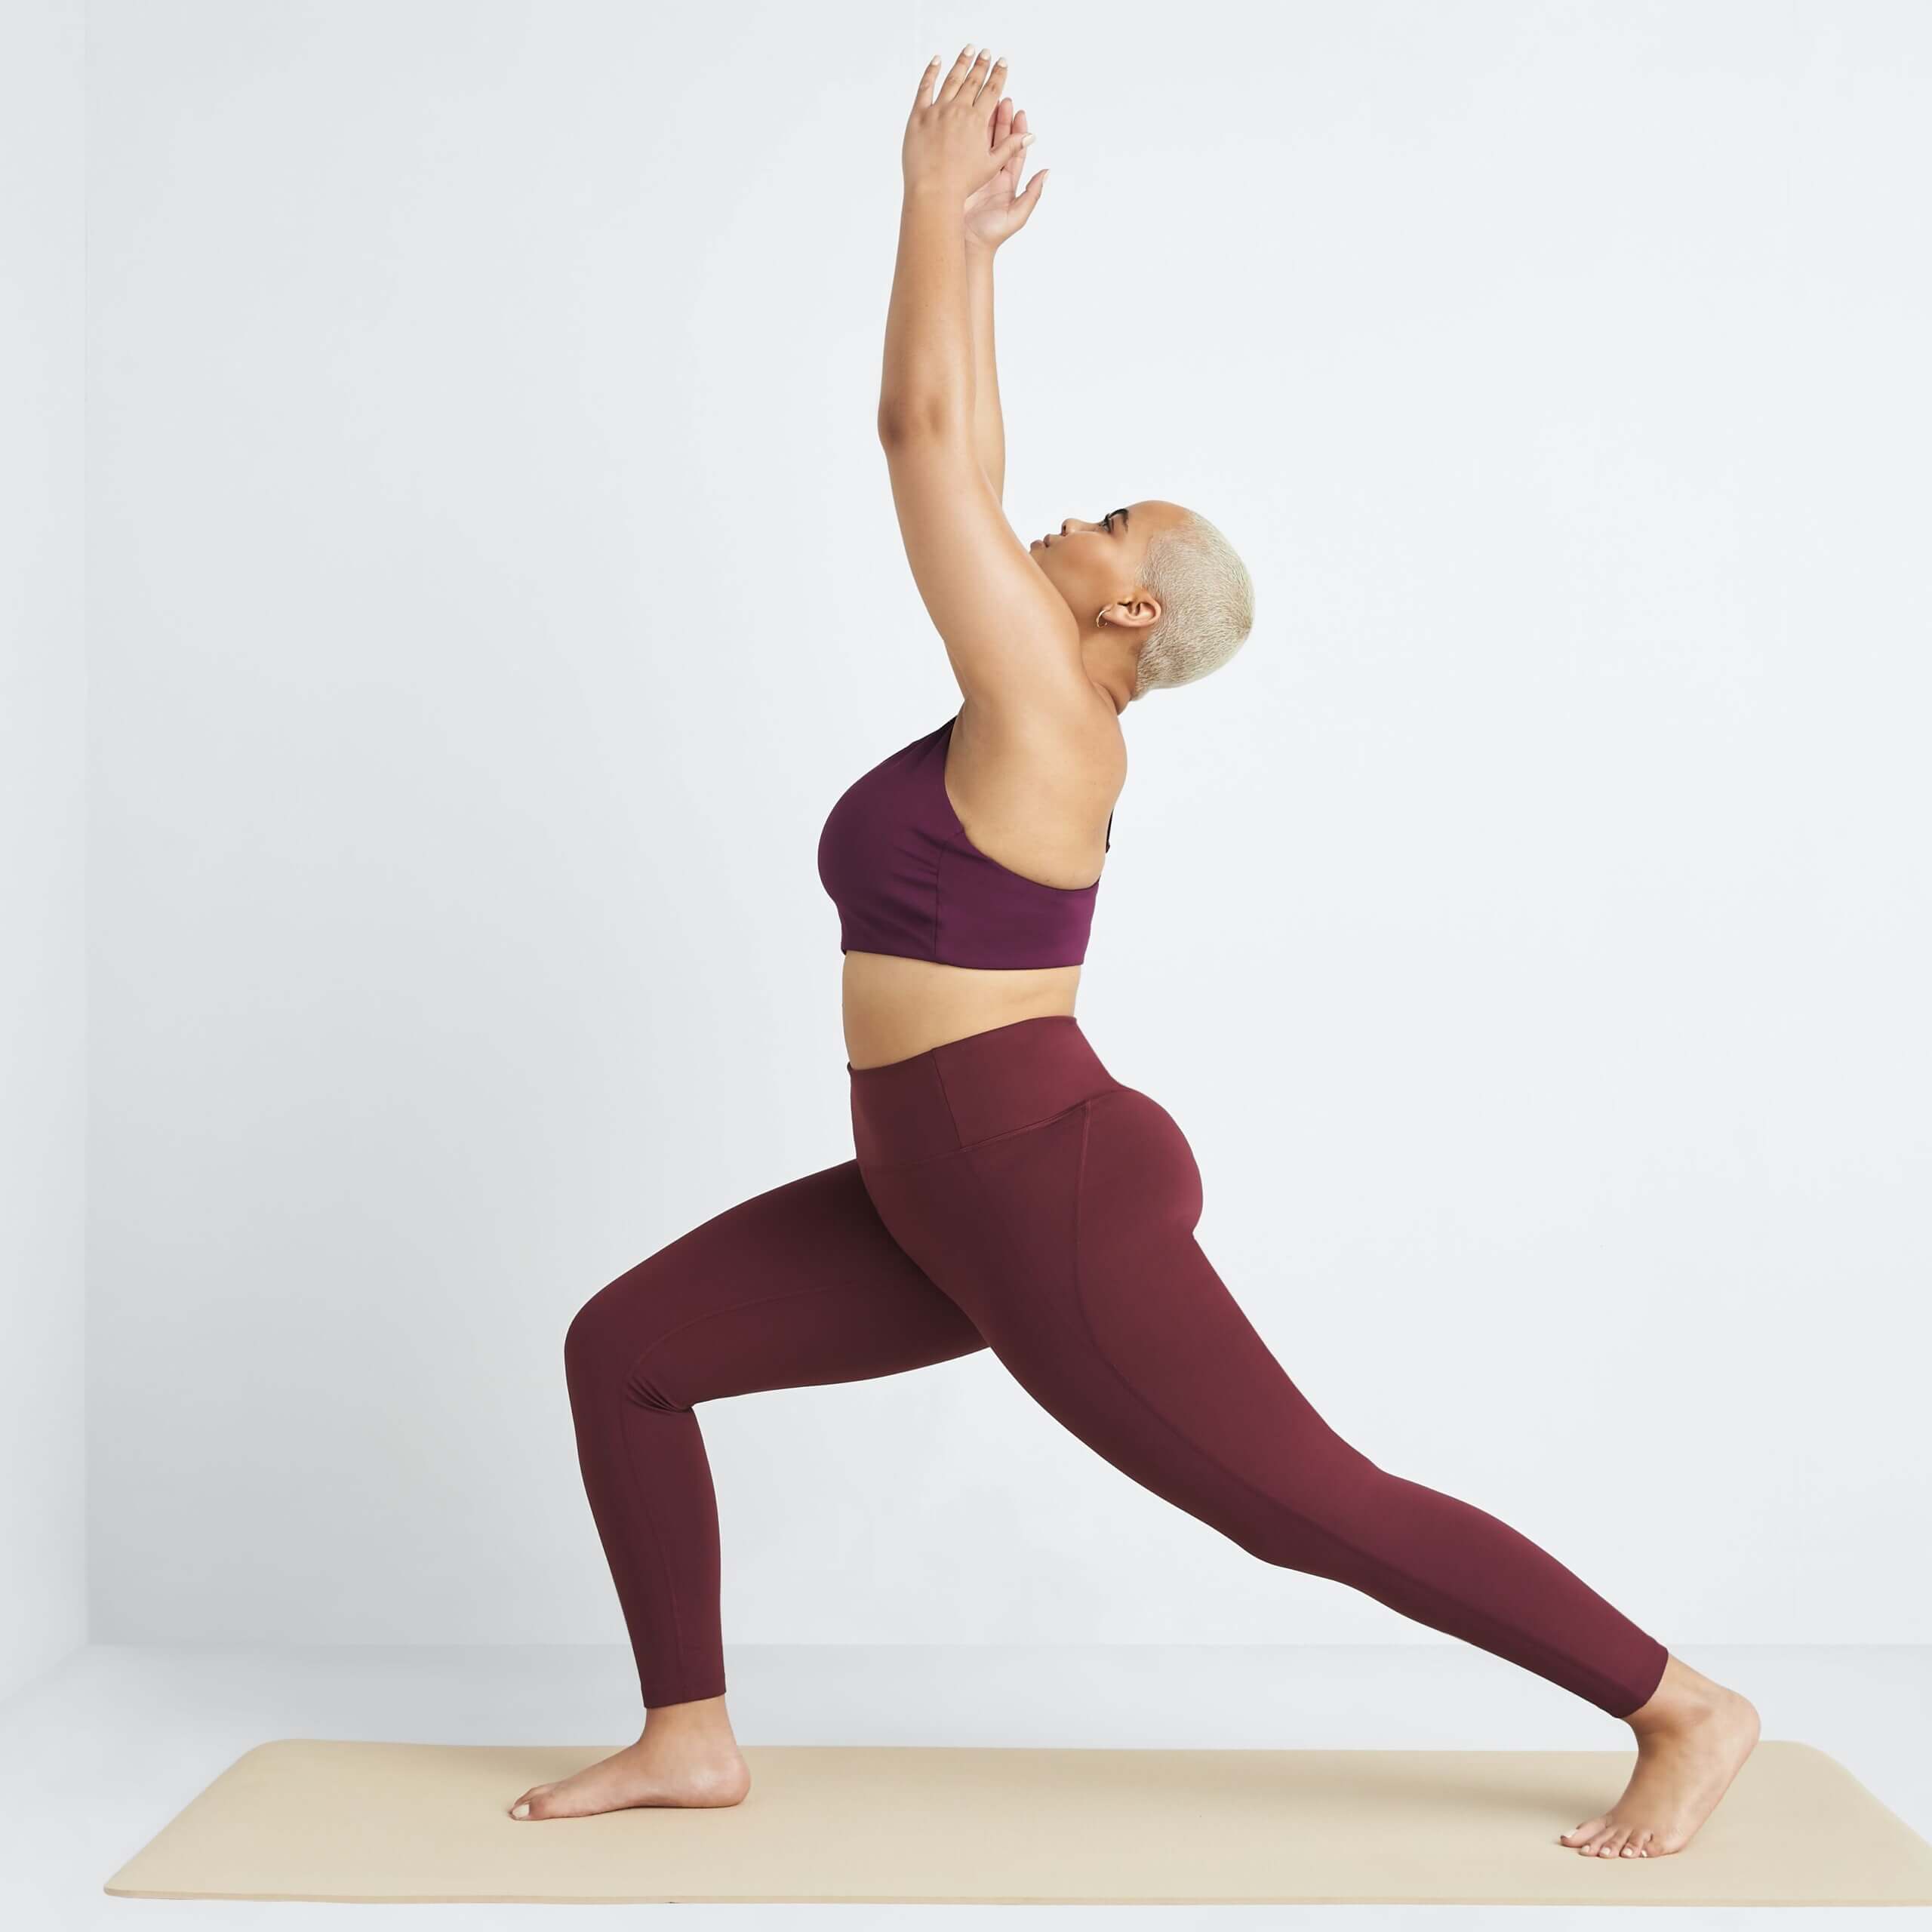 What to Wear to a Yoga Class? An essential guide about comfy yoga